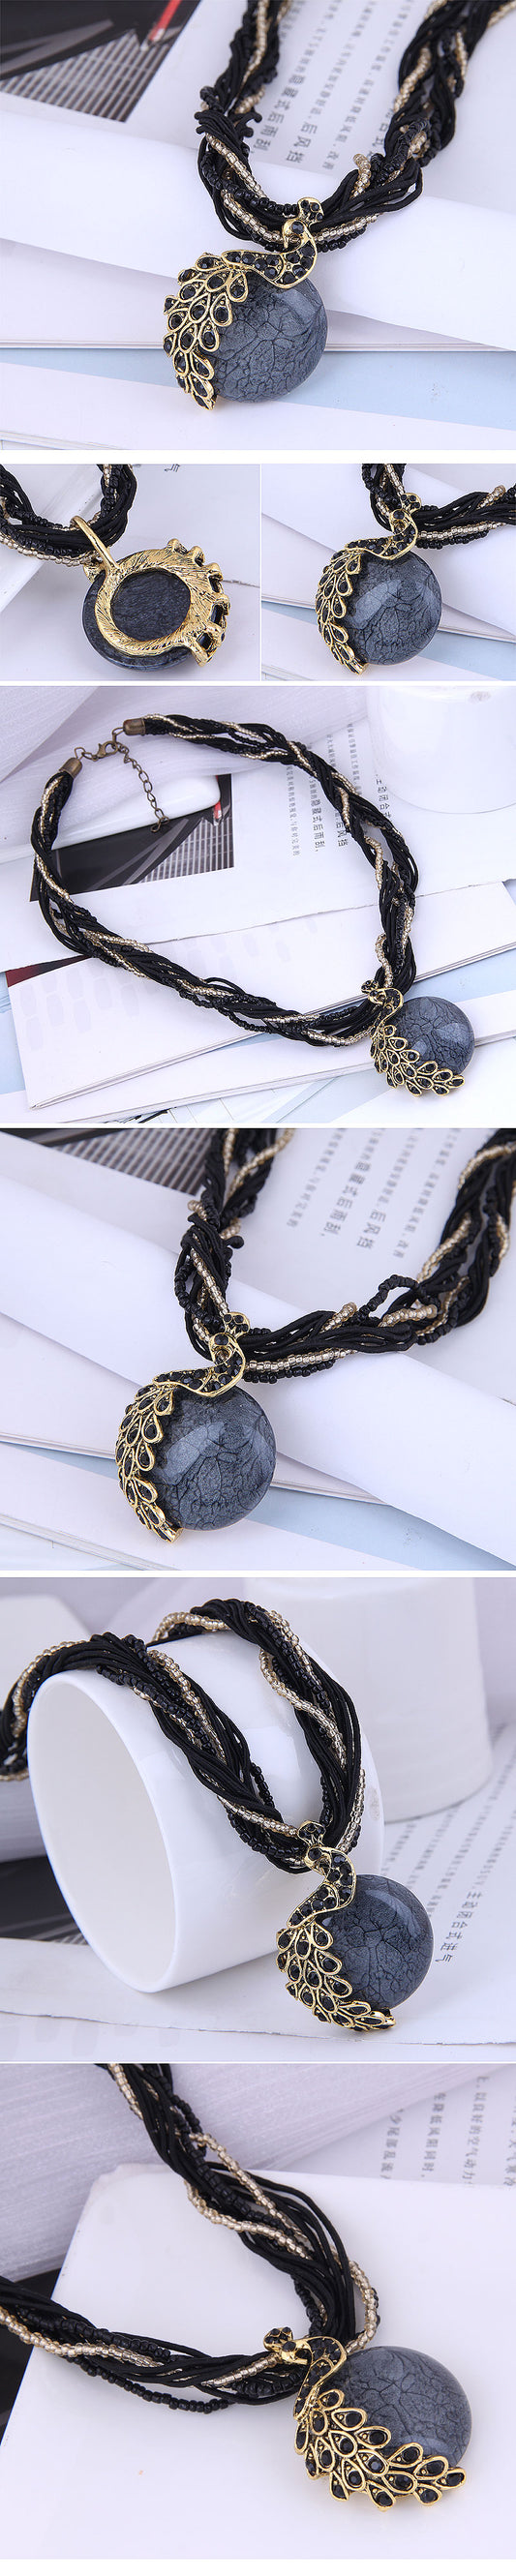 Bohemian Style Peacock Gem Pendent Multi-layer Braided Necklace Wholesale Gooddiy